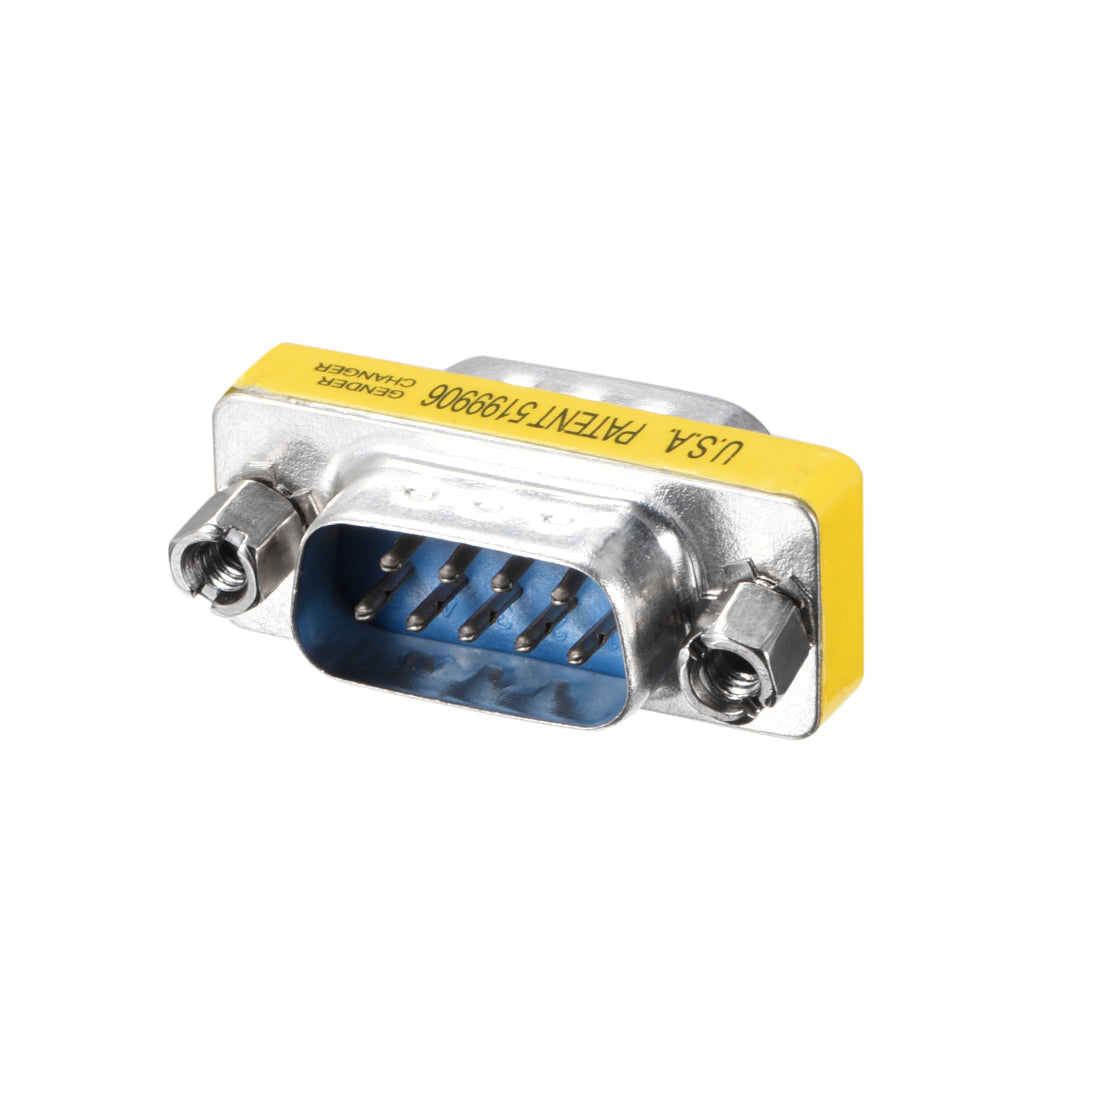 uxcell Uxcell DB9 VGA Gender Changer 9 Pin Male to Male 2-row Mini Gender Changer Coupler Adapter Connector for Serial Applications Blue